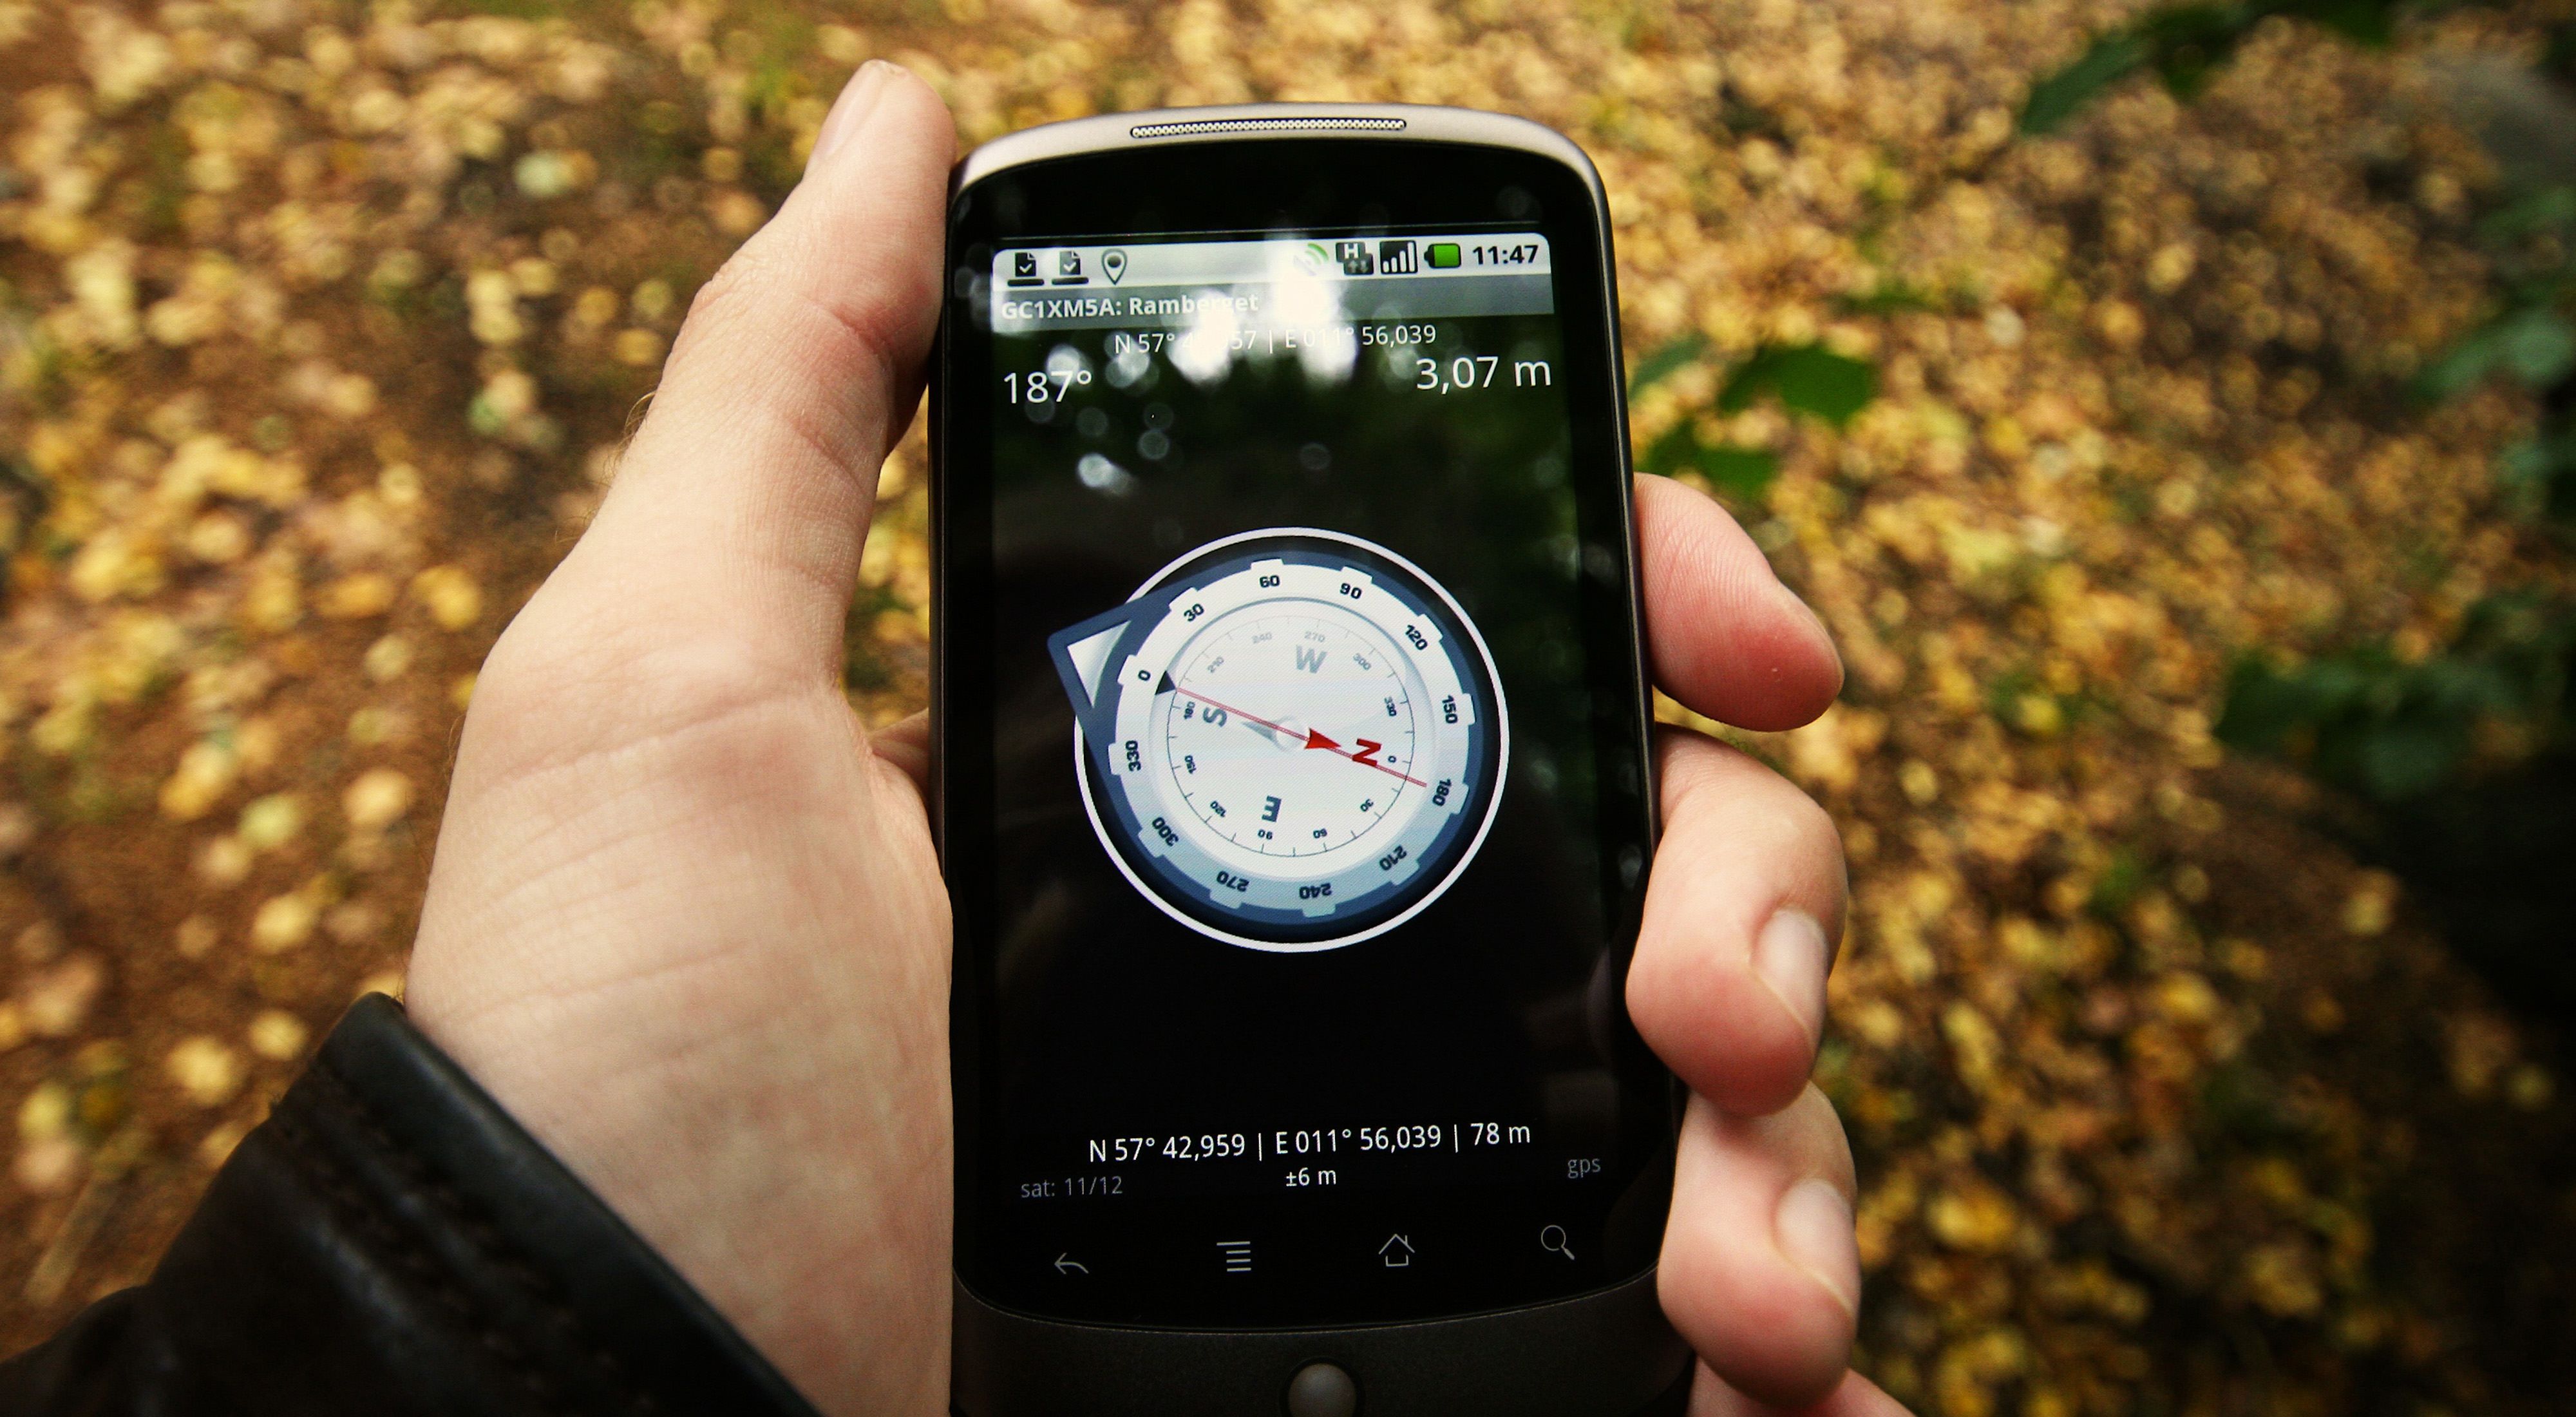 A man standing outdoors holds a cell phone showing map coordinates on its screen.